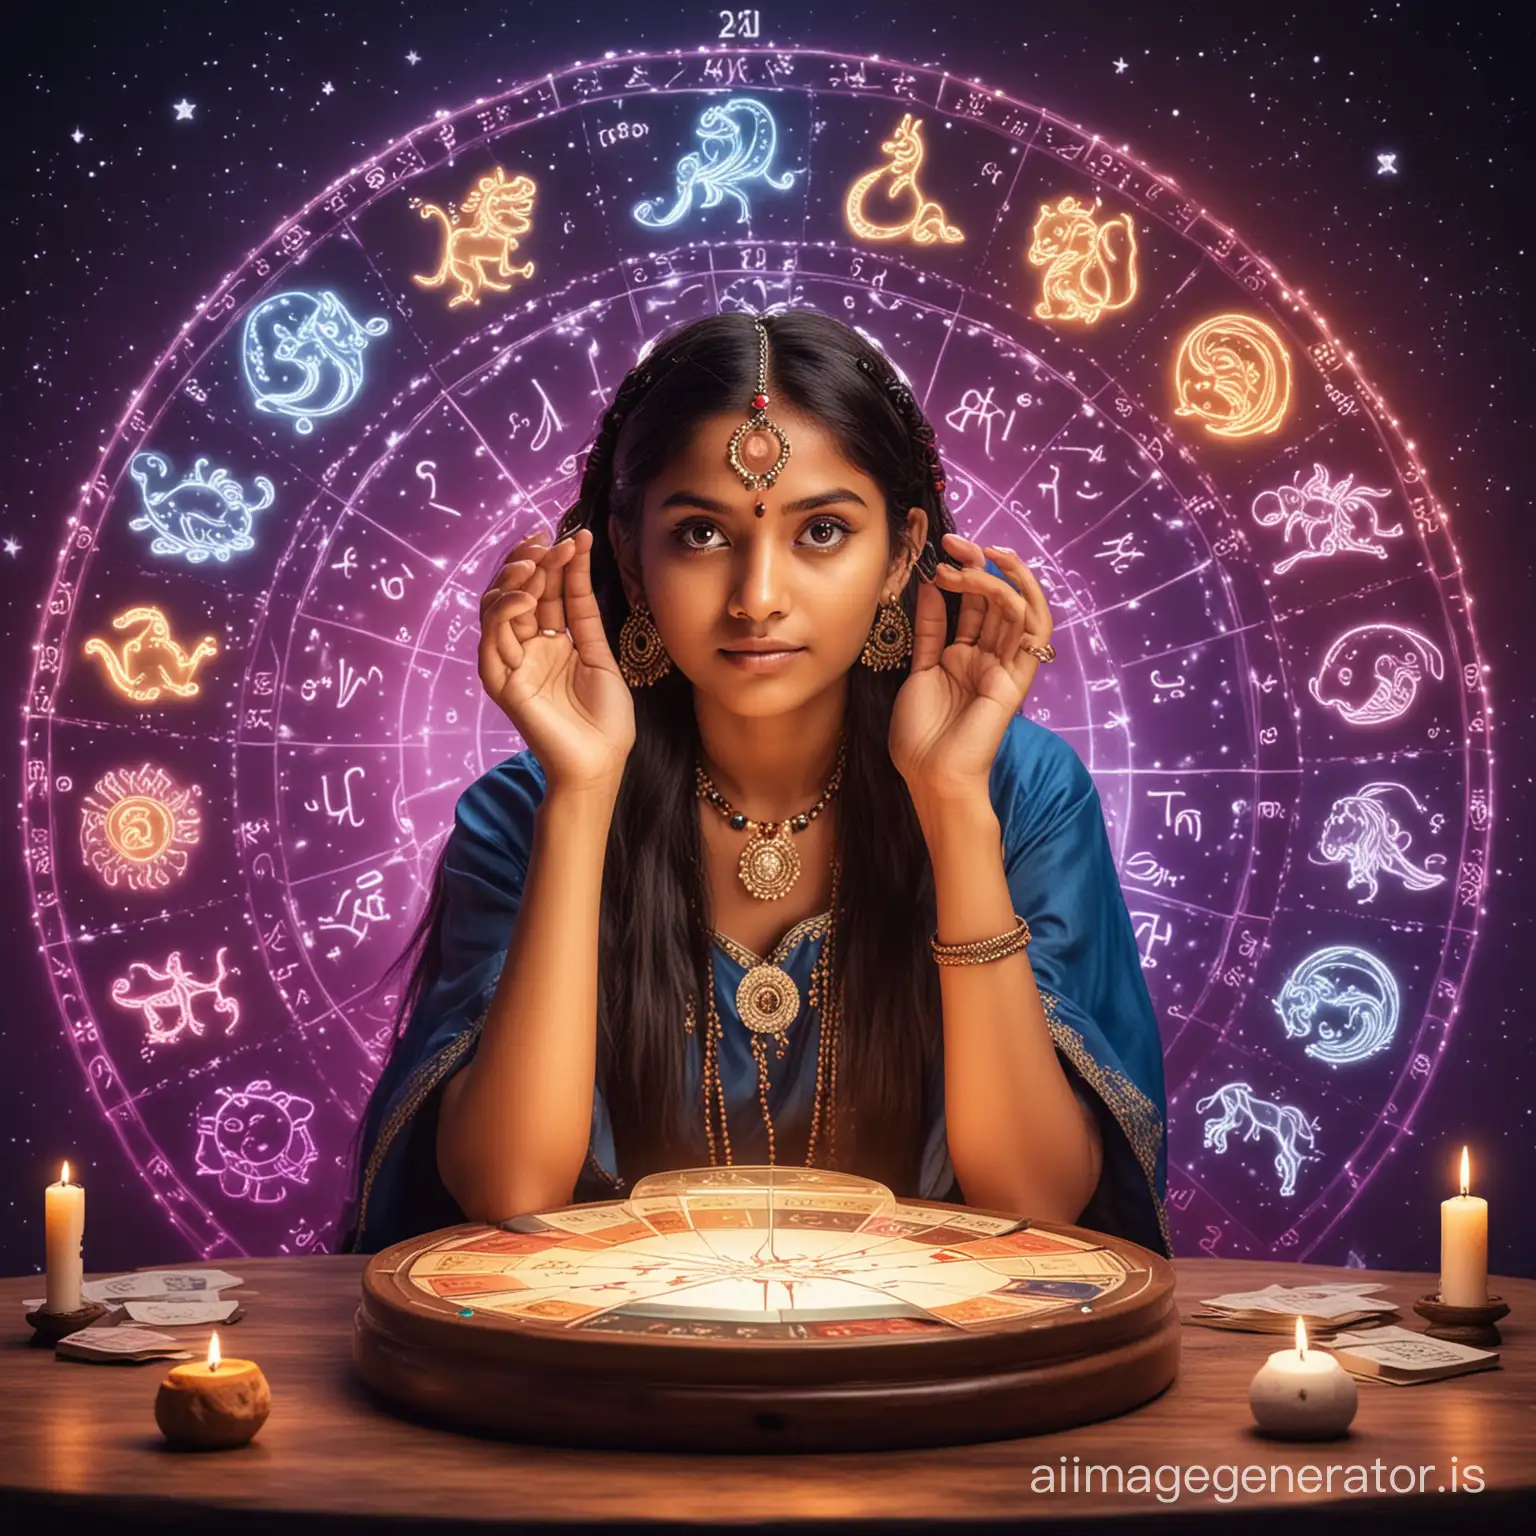 Indian-Female-Fortune-Teller-with-Zodiac-Signs-Predicting-a-Bright-Future